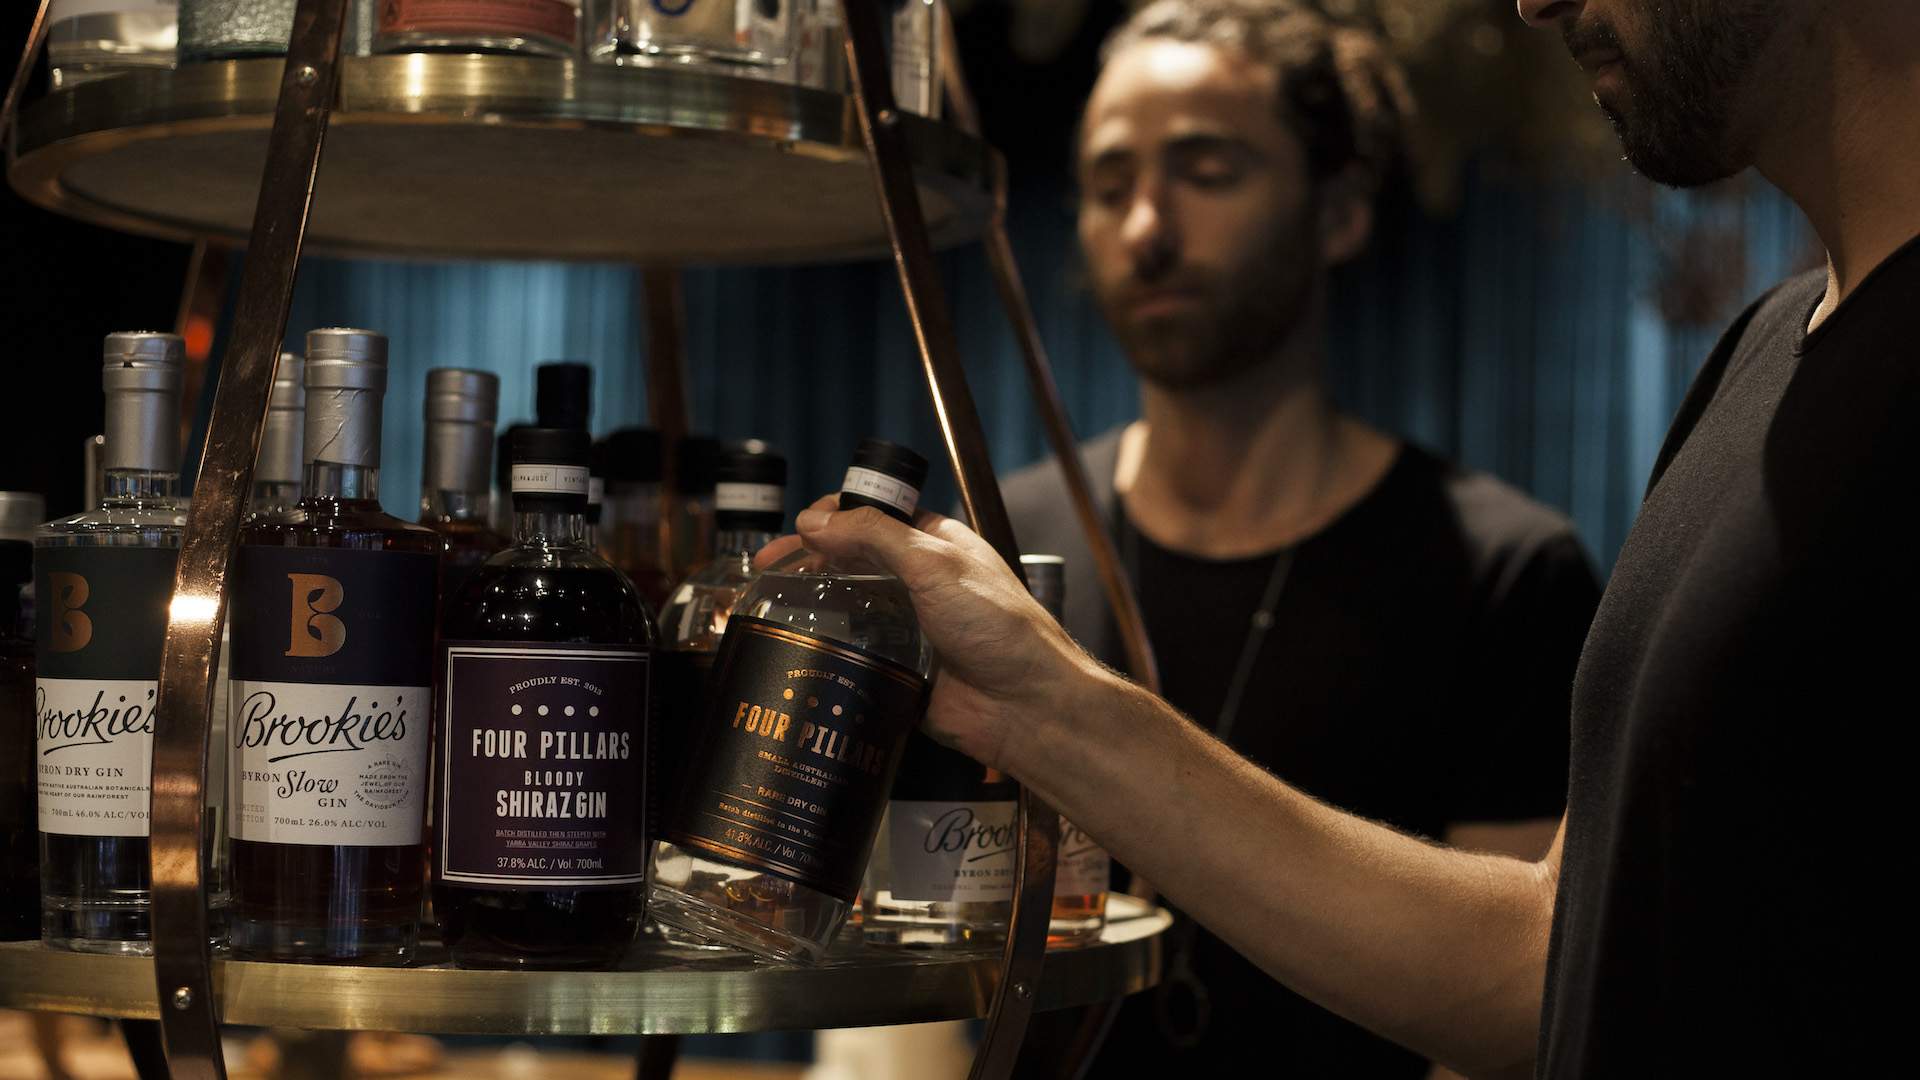 Native Drops Is the Beautifully Designed Bondi Bottleshop Trying to Redefine Your Liquor-Buying Experience